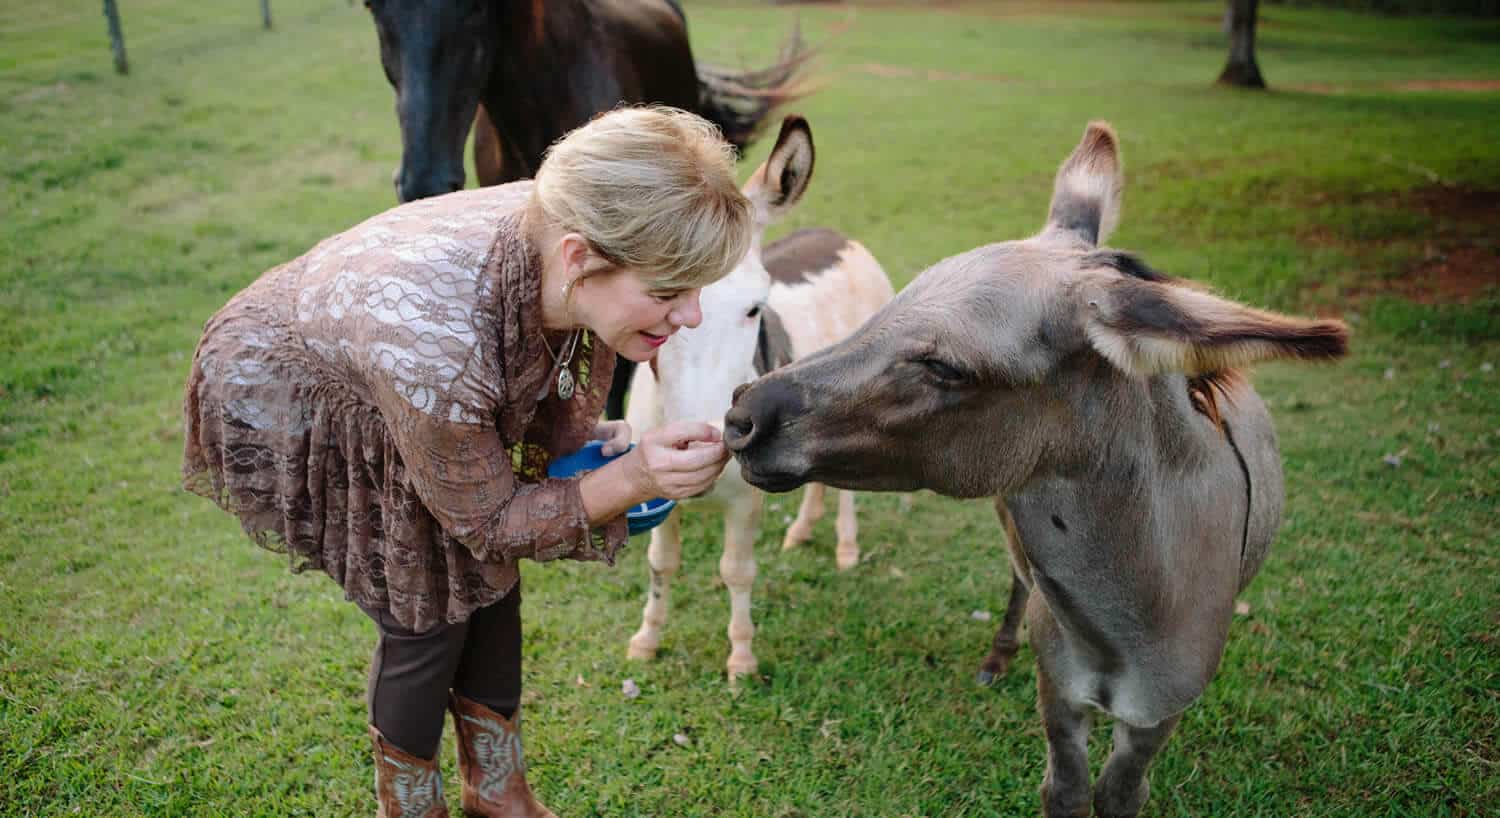 Lady feeding treats to a brown donkey while a white donkey waits in the background. 